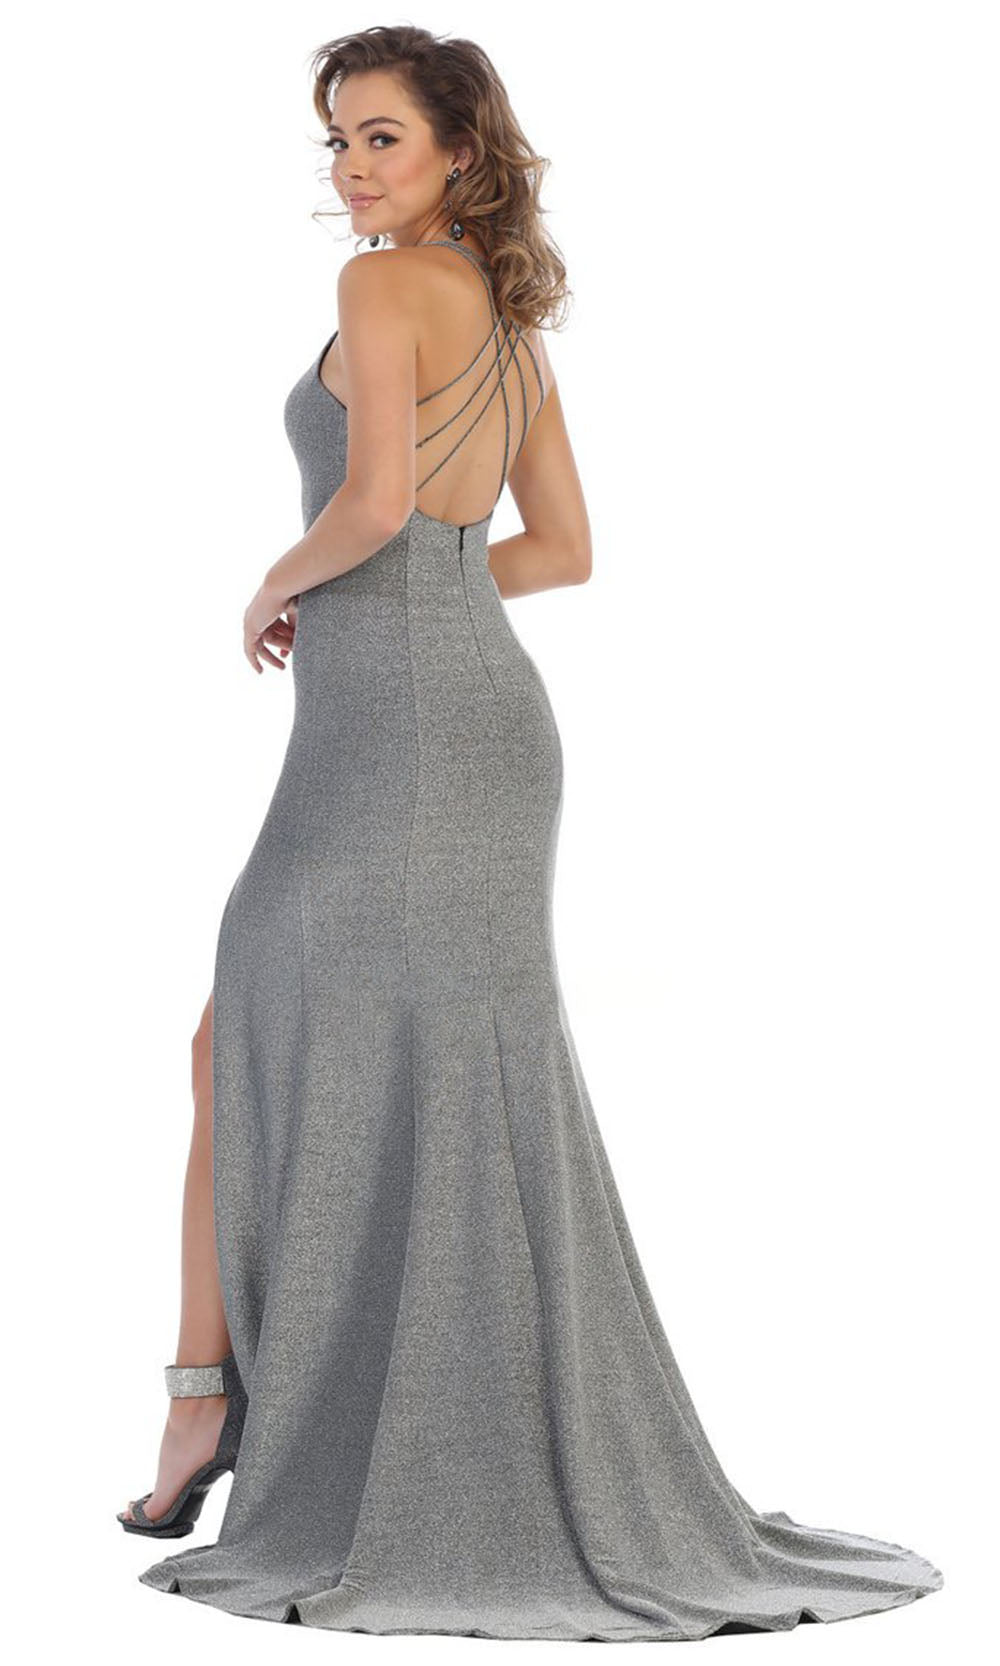 May Queen - MQ1655 Strappy Back Glittered Dress In Silver